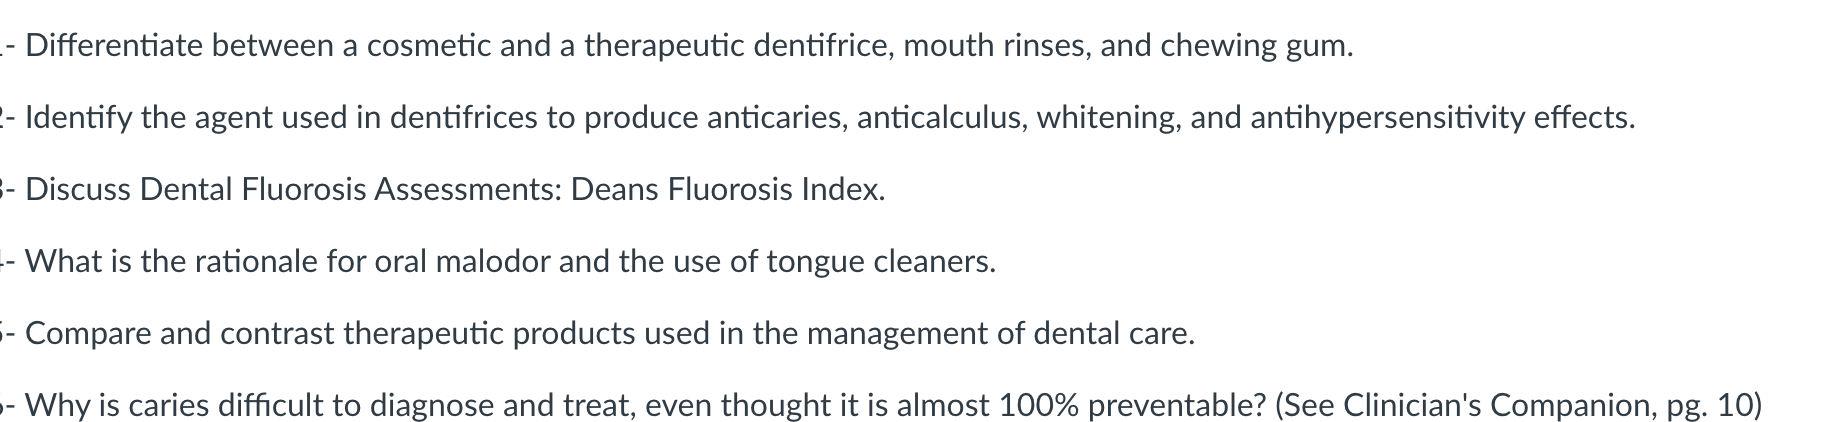 Differentiate Between A Cosmetic And A Therapeutic Dentifrice Mouth Rinses And Chewing Gum Identify The Agent Use 1